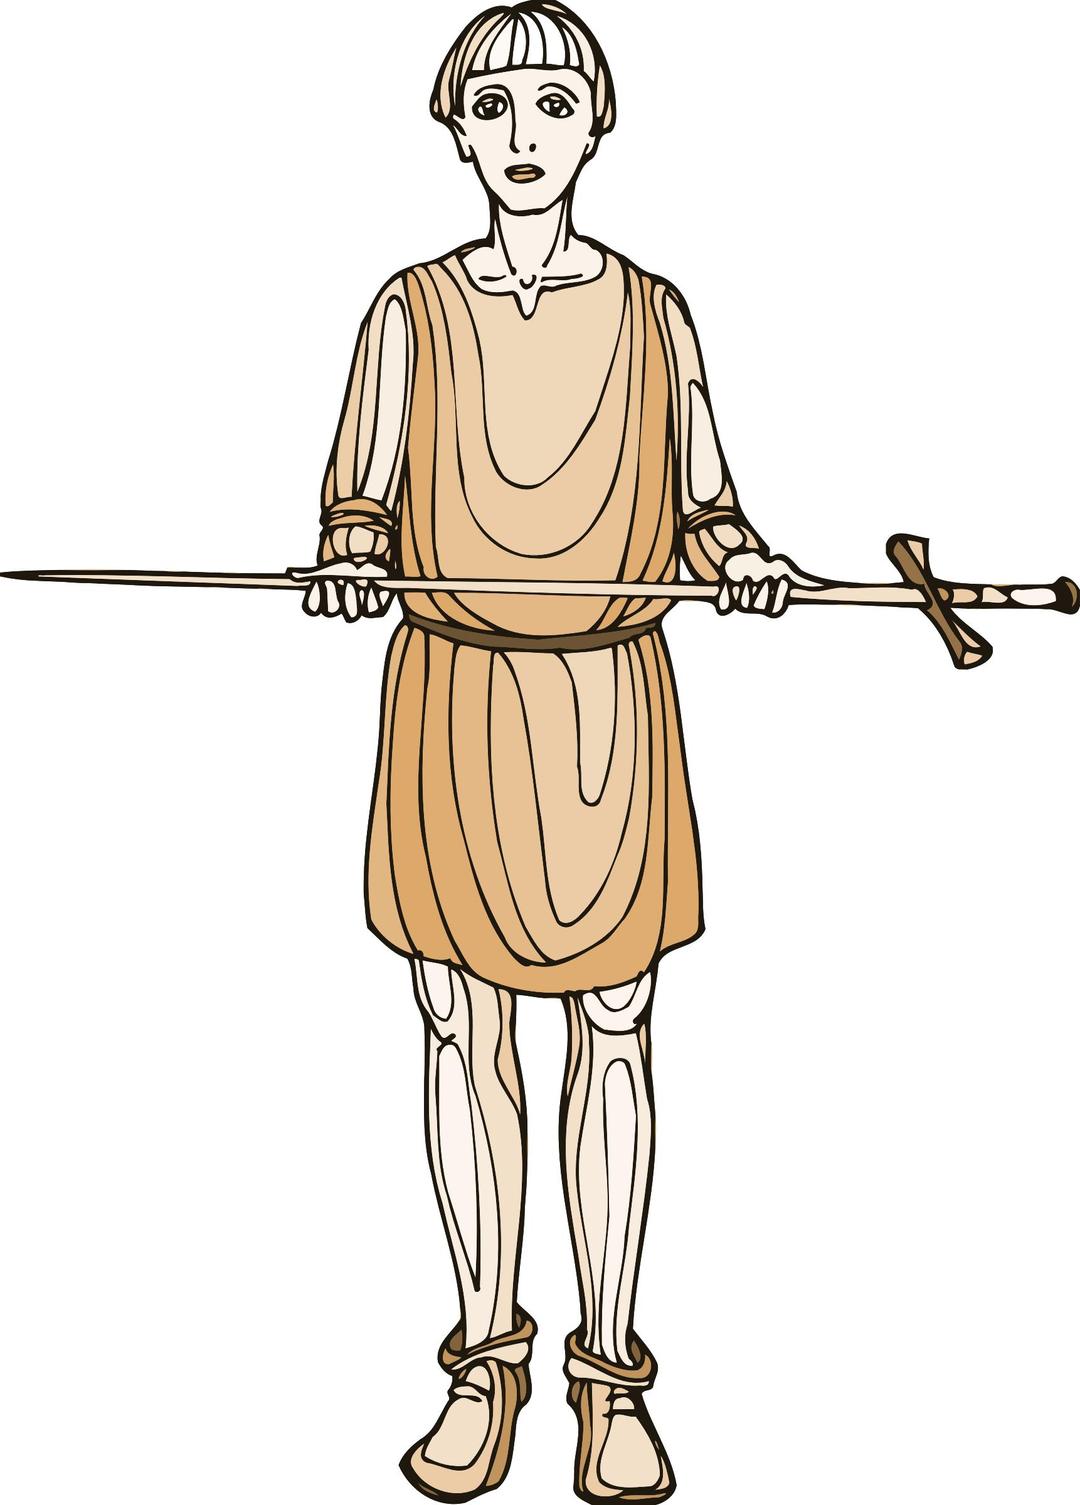 Shakespeare characters - sword bearer png transparent